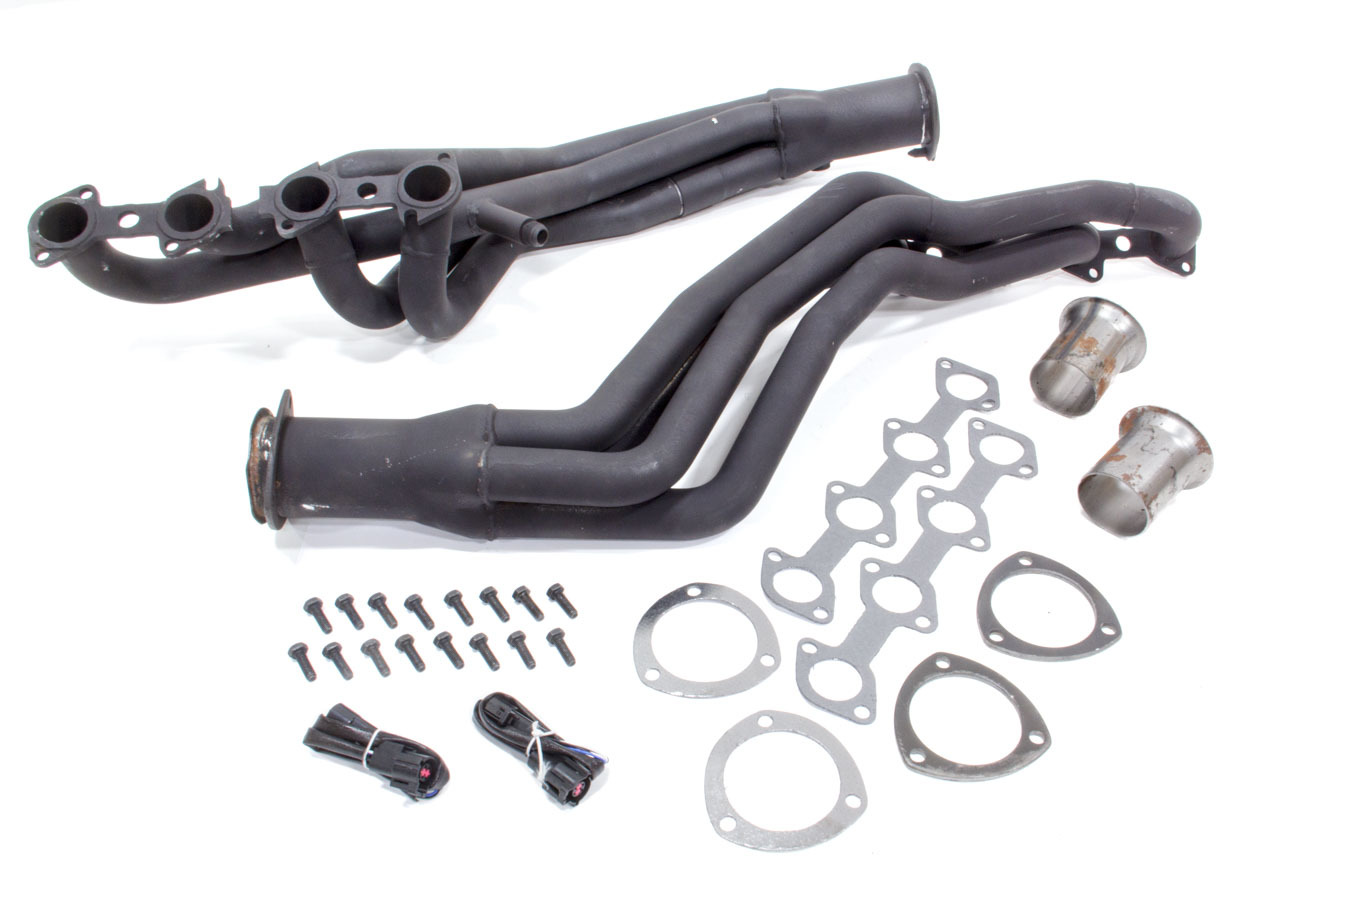 FLOWTECH Headers - 96-02 Mustang w/4.6L 2V, 1-5/8 in Primary, 3 in Collector, St